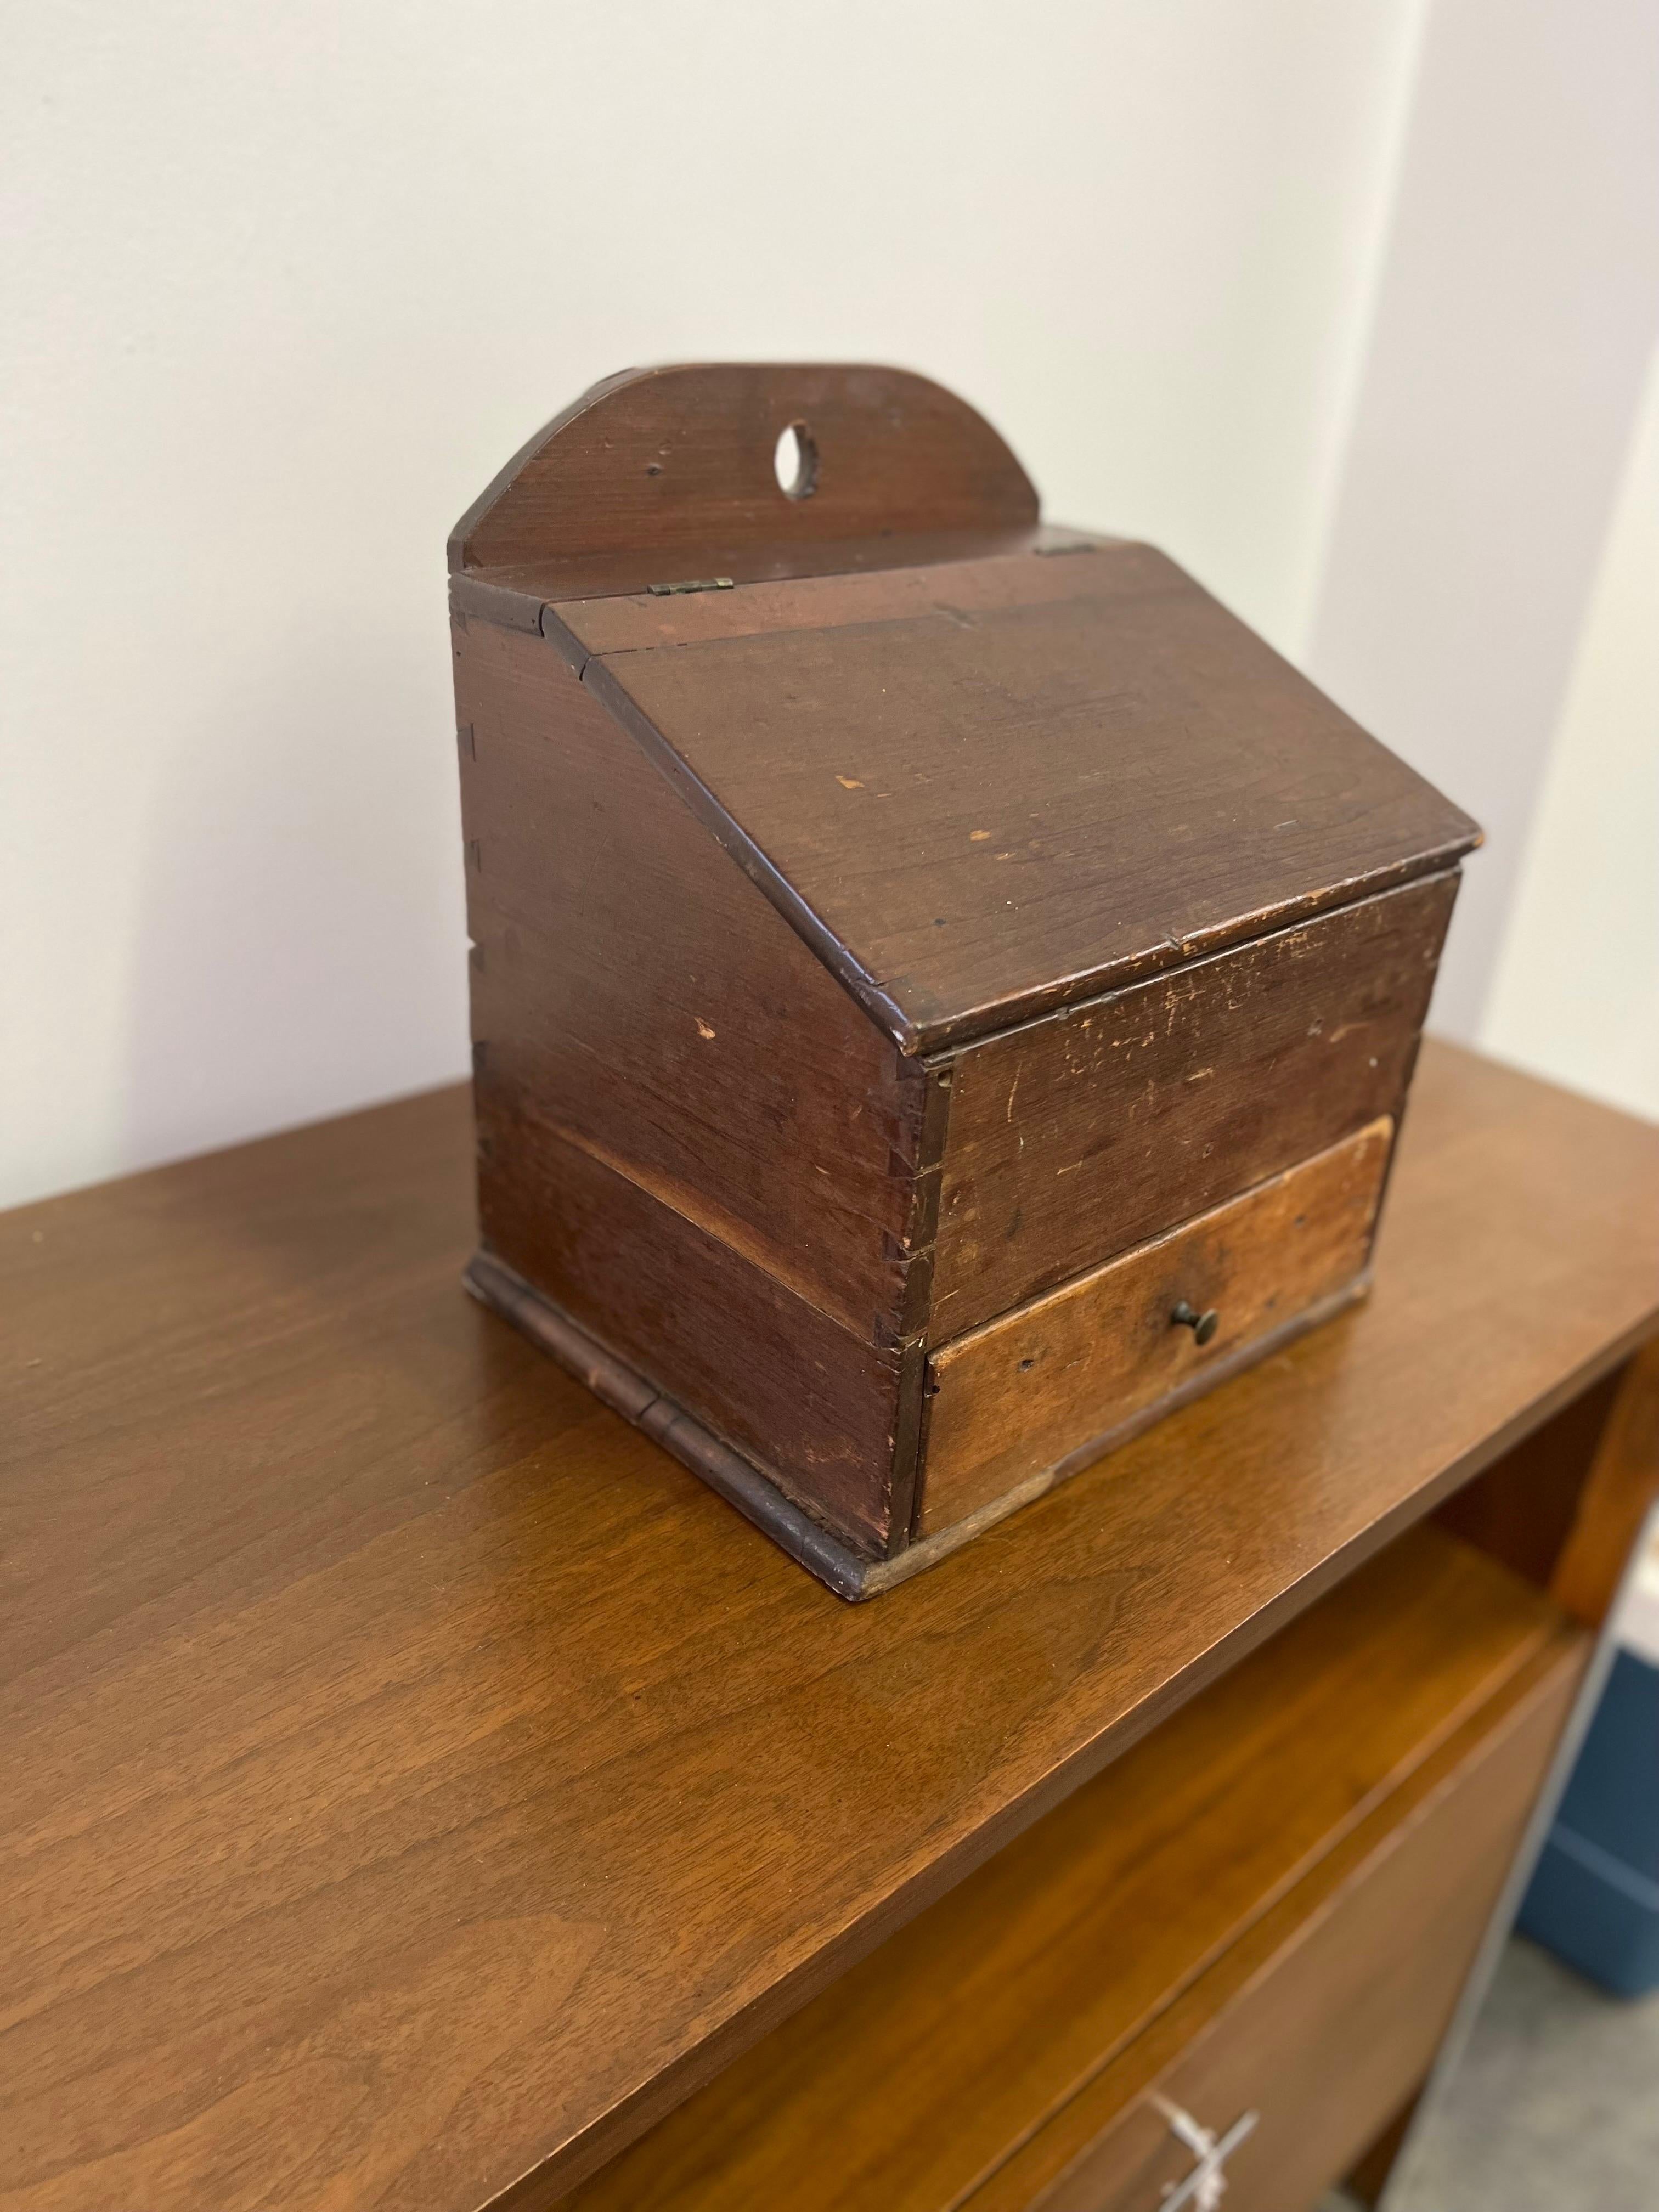 Antique Shaker Spice Box

Offered is a unique antique Shaker spice box. The piece is from the 1800’s. The piece features a lift up lid as well a single drawer. The drawer is divided to keep your different spices separated. The box is dovetailed in